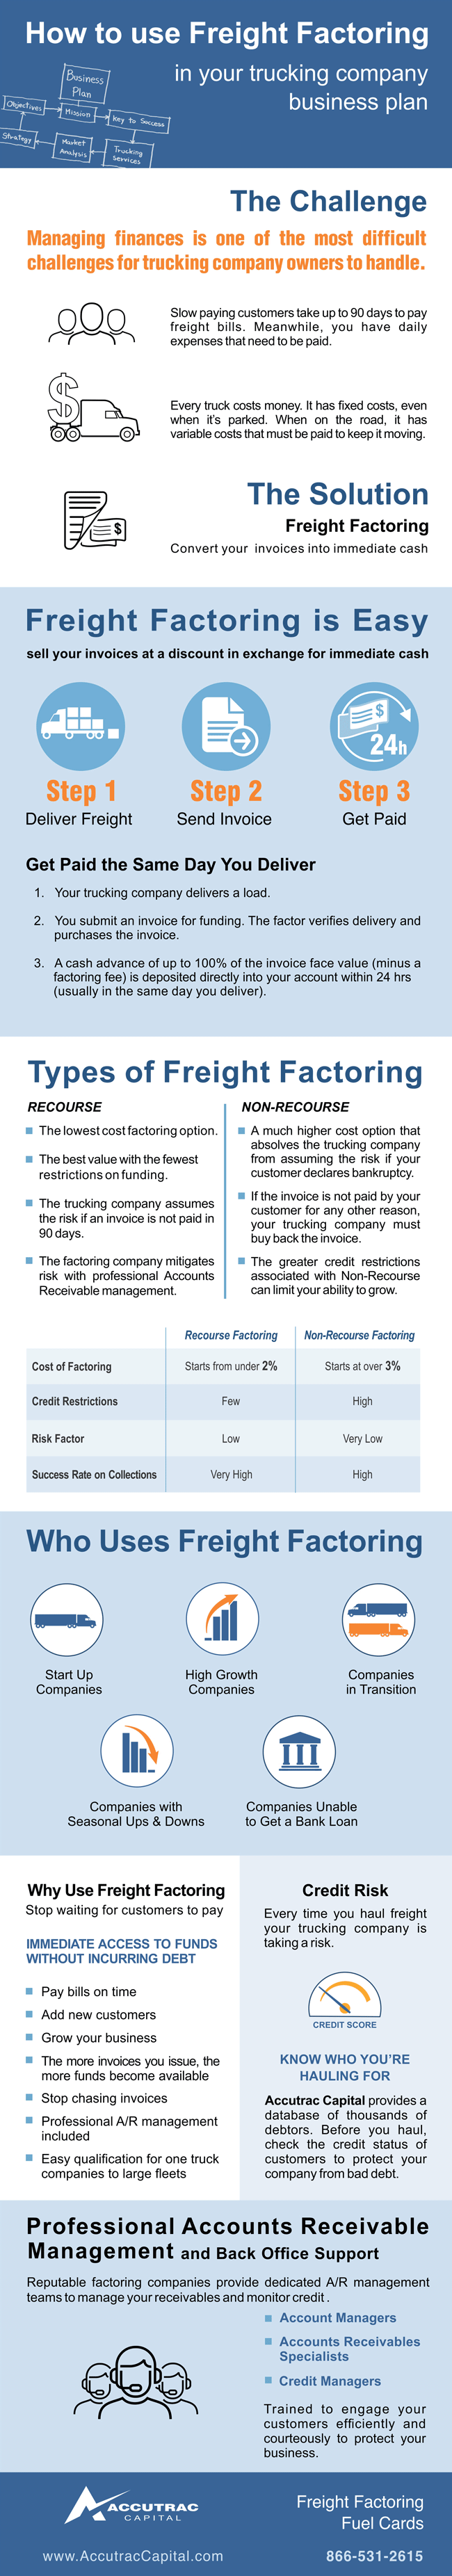 Freight Factoring for Your Trucking Business Plan